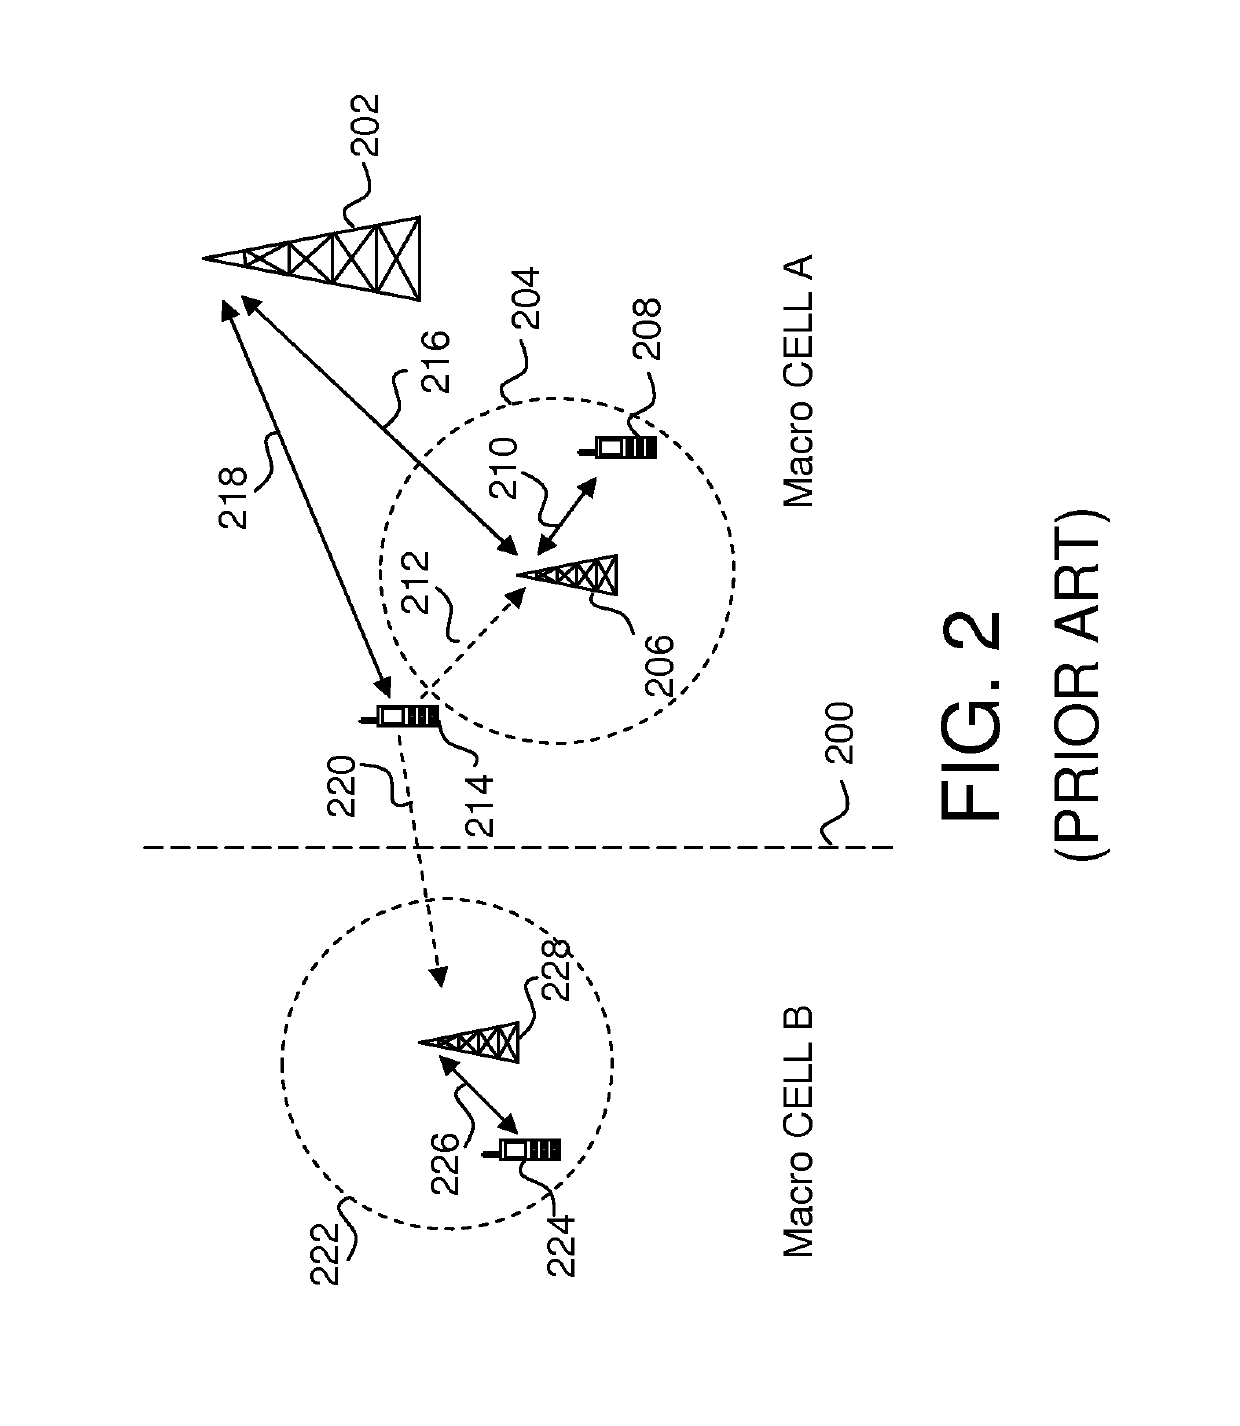 Uplink signaling for cooperative multipoint communication